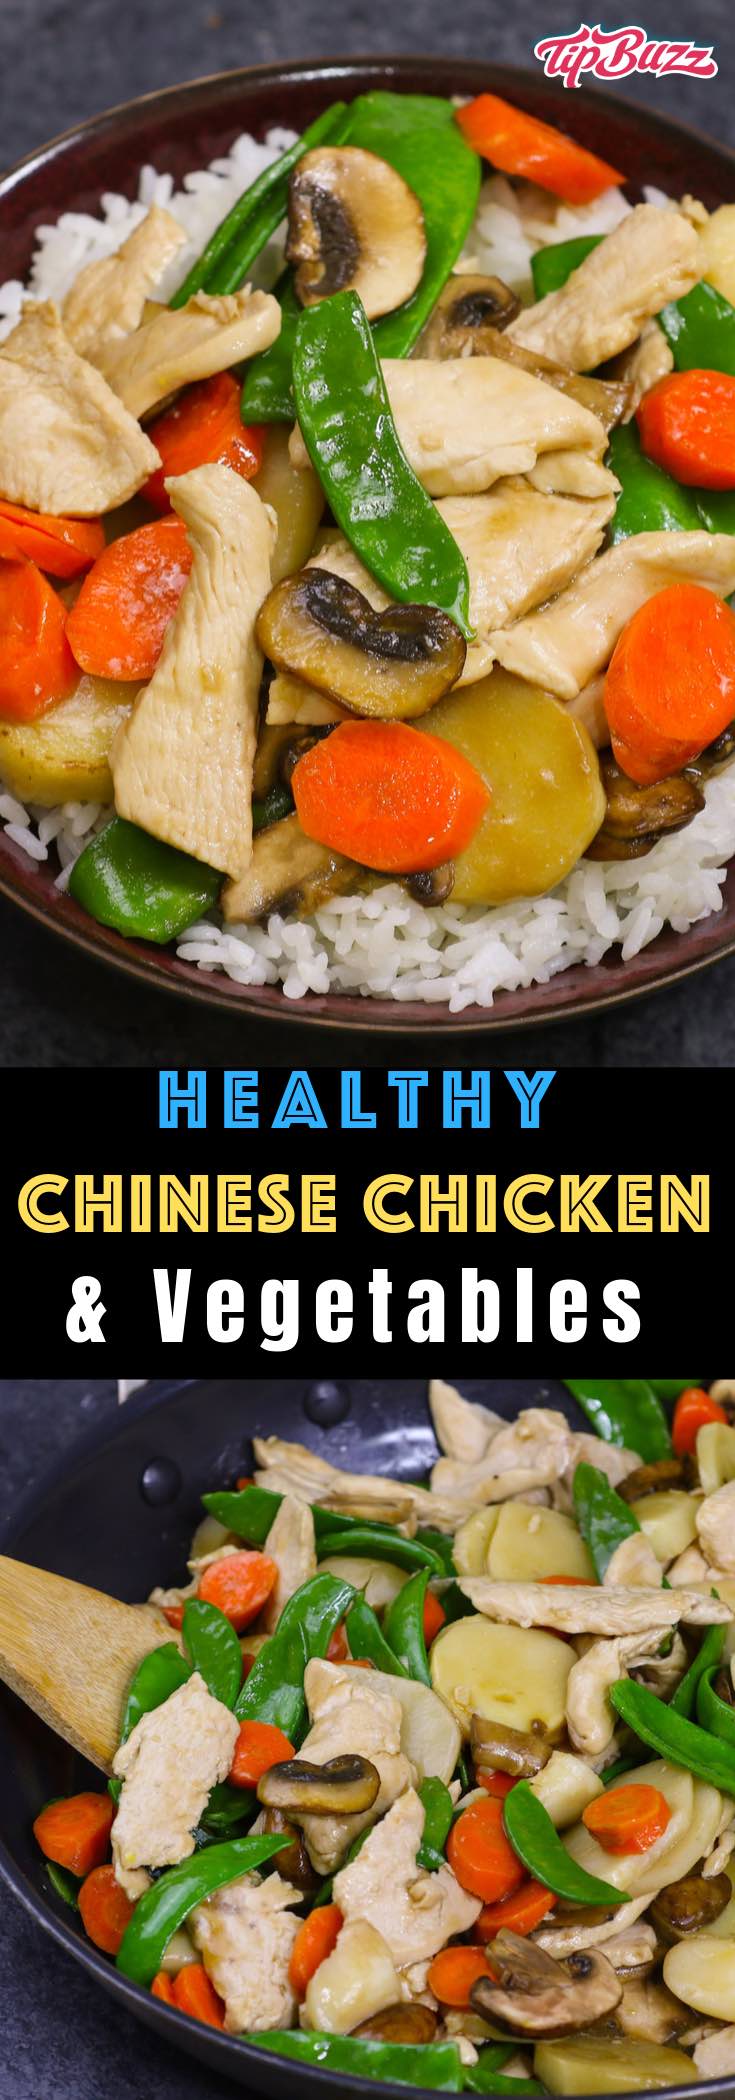 Moo Goo Gai Pan is a delicious Chinese chicken and vegetable stir-fry recipe with a mouthwatering moo goo gai pan sauce. I will share with you easy restaurant techniques for making the most tender and flavorful chicken for stir-fry. This recipe is healthy, keto-friendly and low in calories.